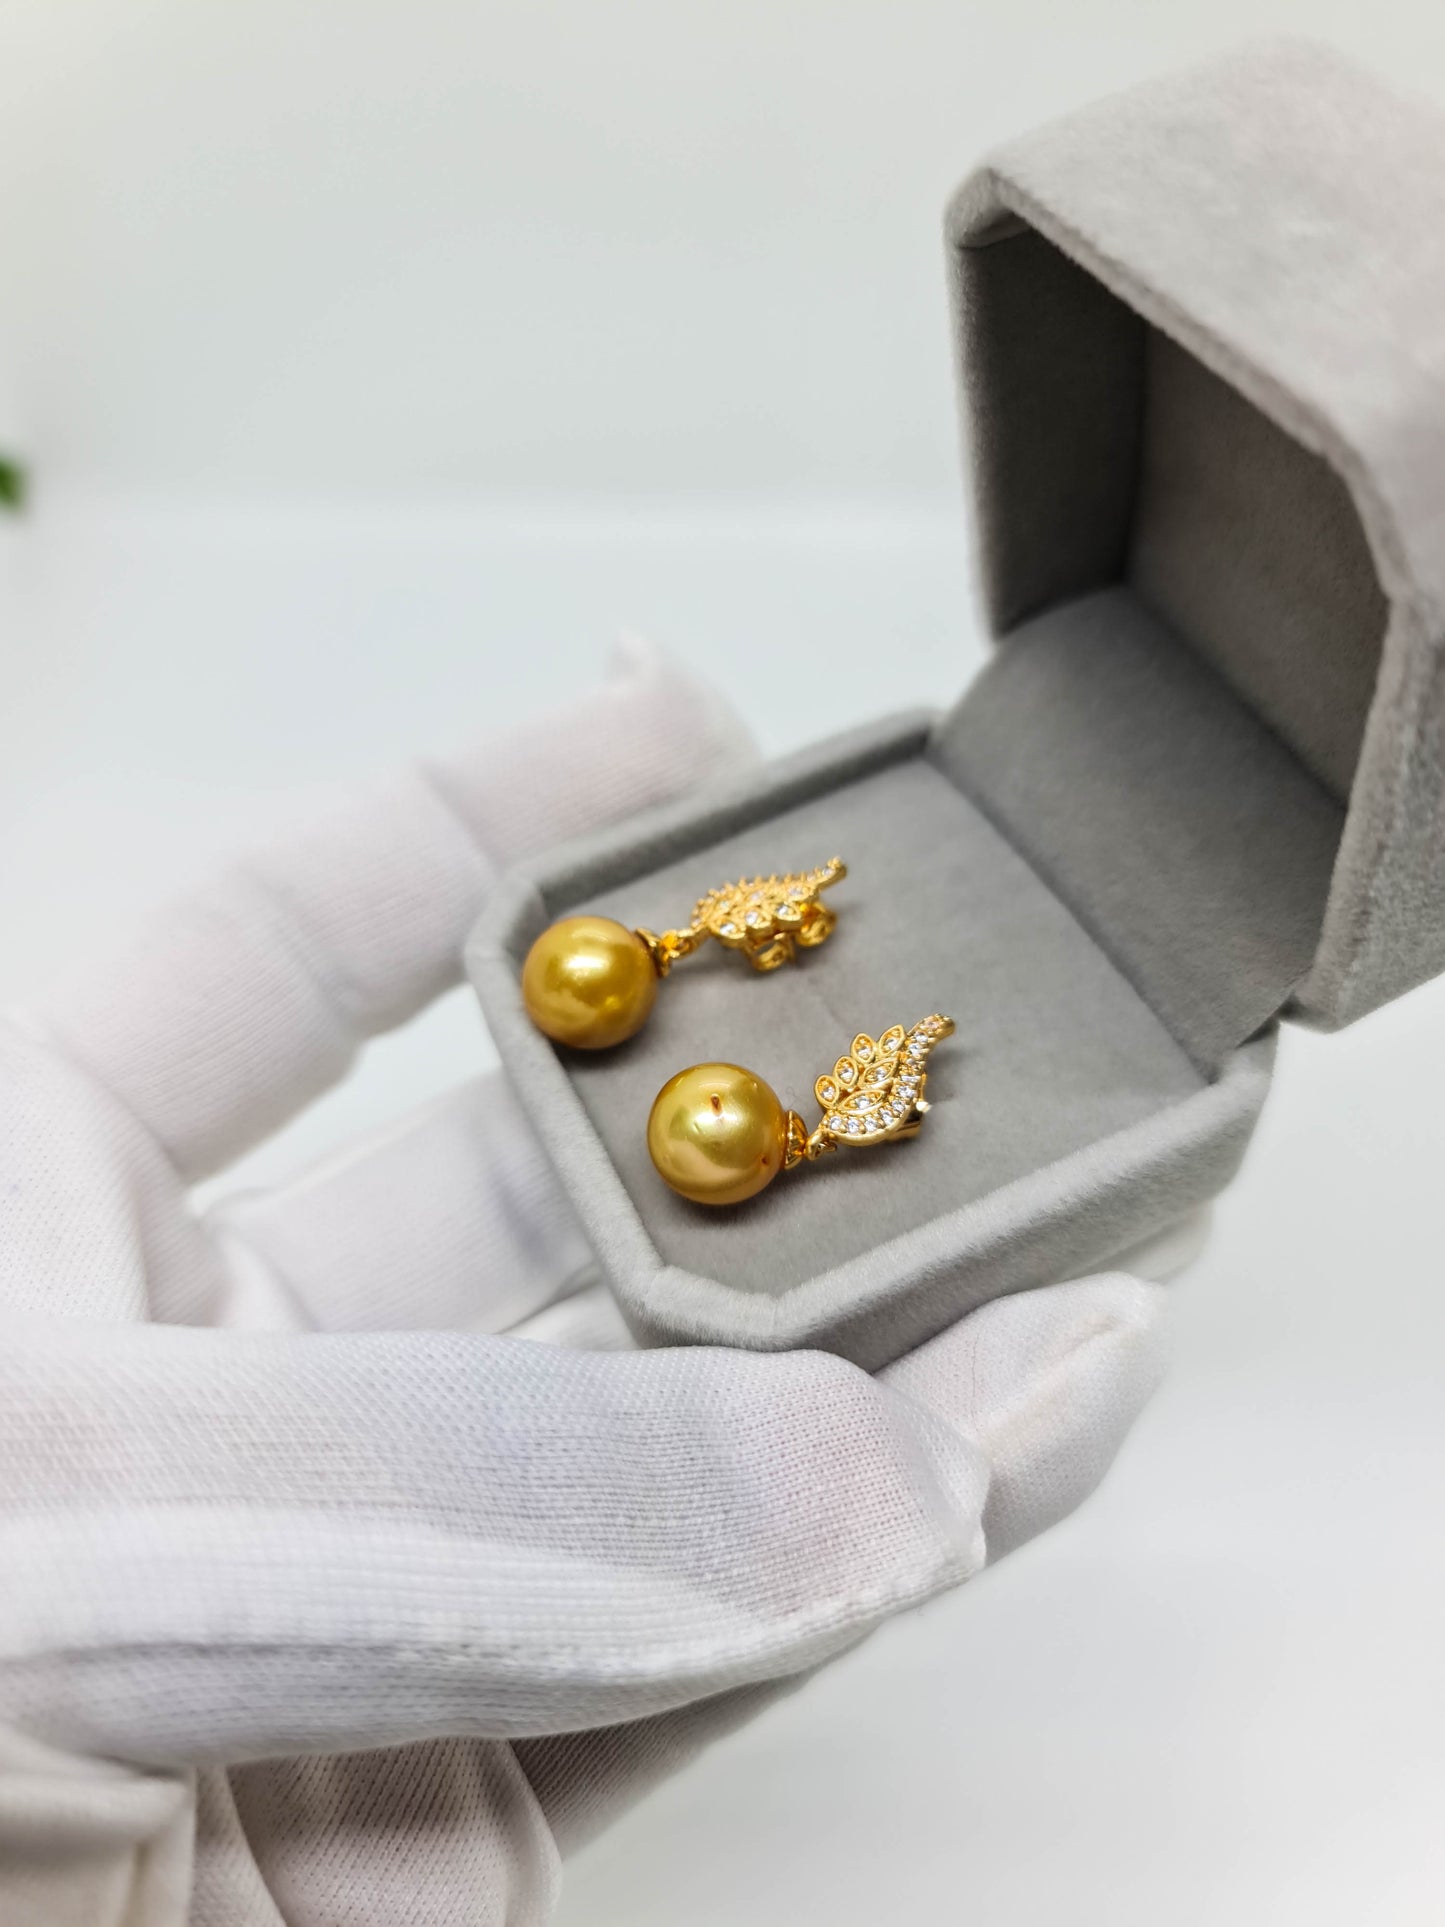 10.5mm Deep Golden South Sea Pearls Earrings in 5Microns Gold Plated